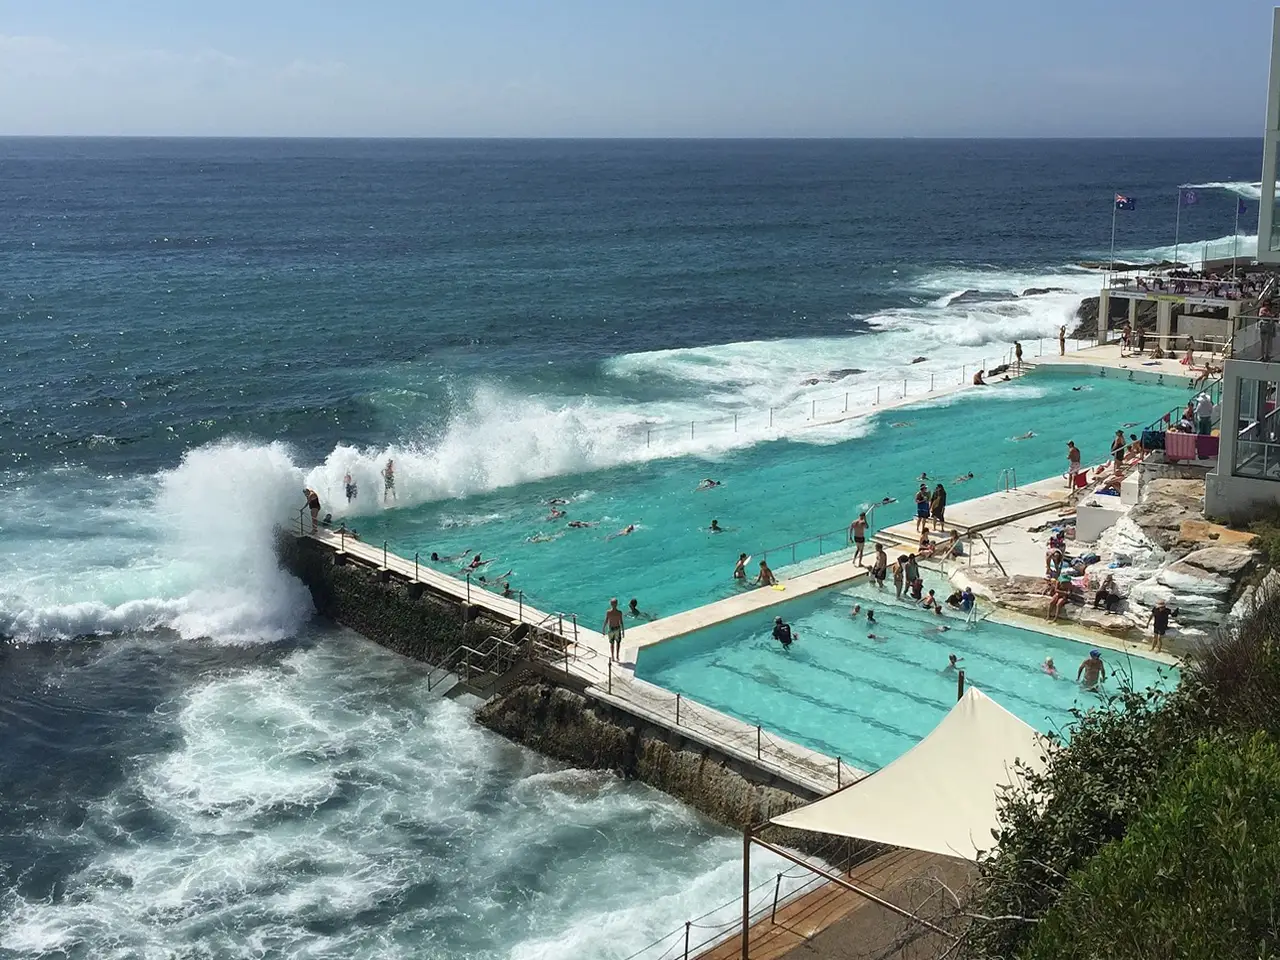 Bondi Beach. You can swim several laps in the seaside pool or look for deals in the Sunday markets.